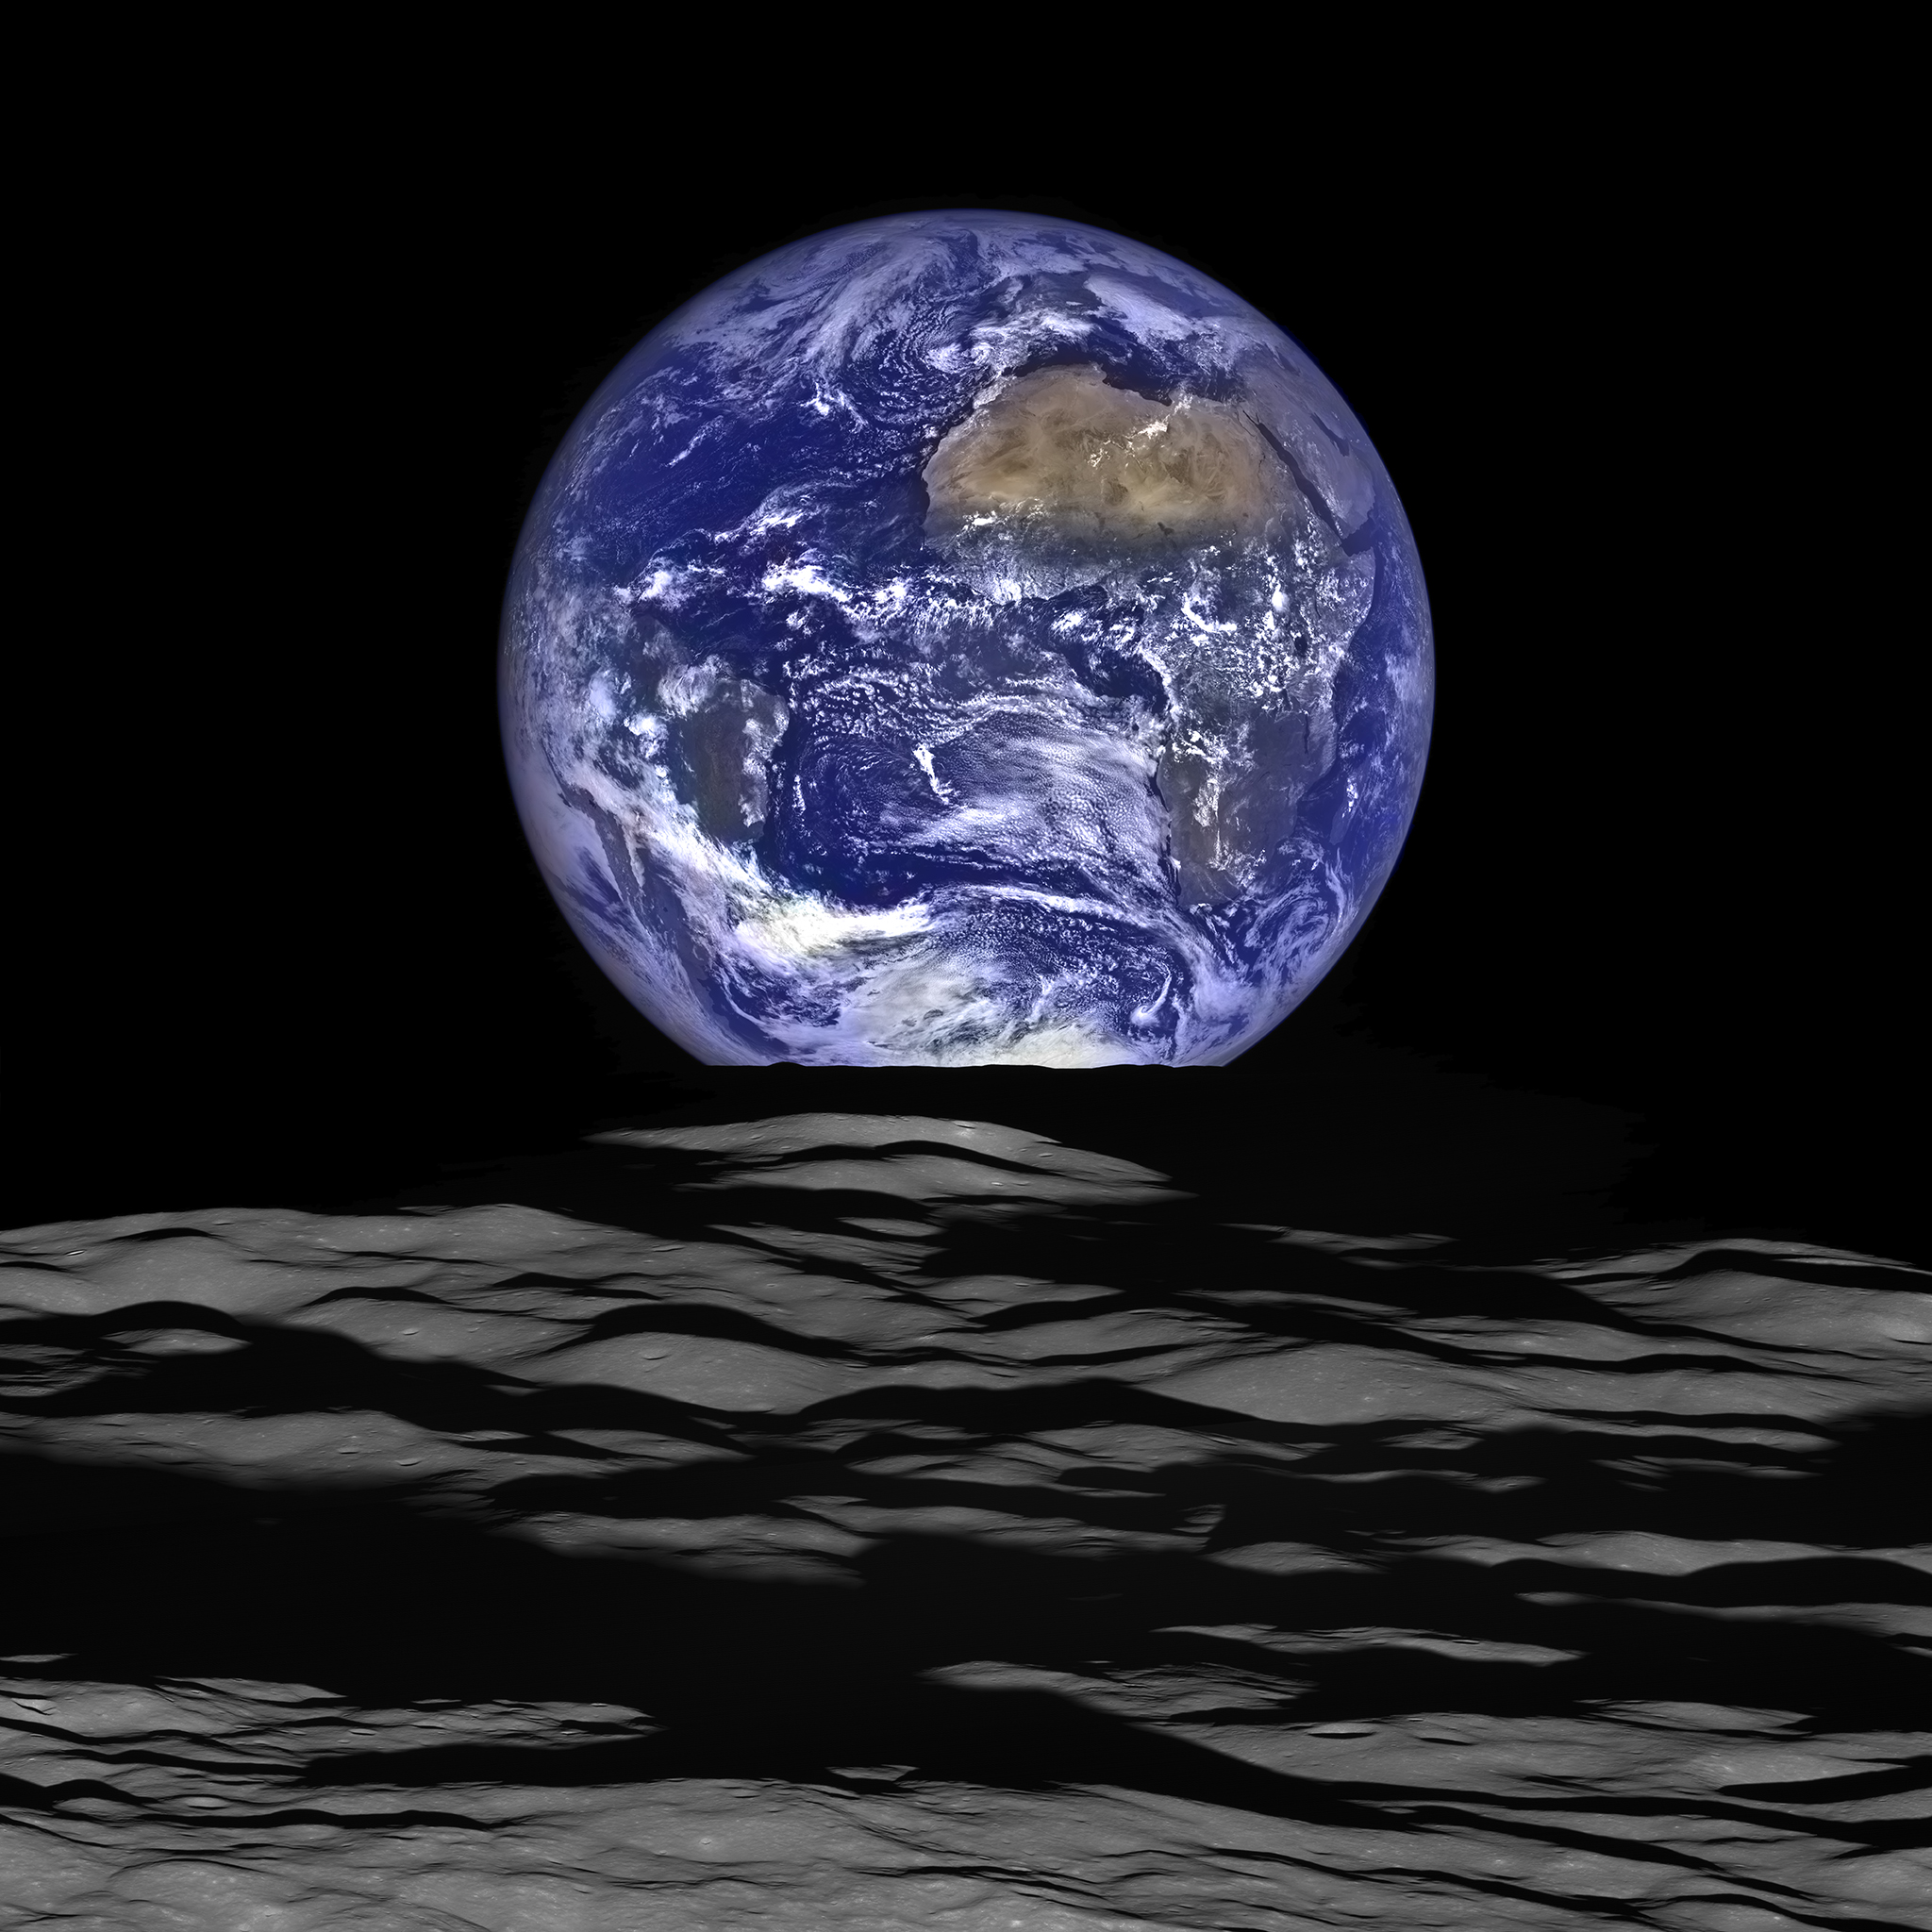 NASA's Lunar Reconnaissance Orbiter (LRO) recently captured a unique view of Earth from the spacecraft's vantage point in orbit around the moon. (NASA/Goddard/Arizona State University)